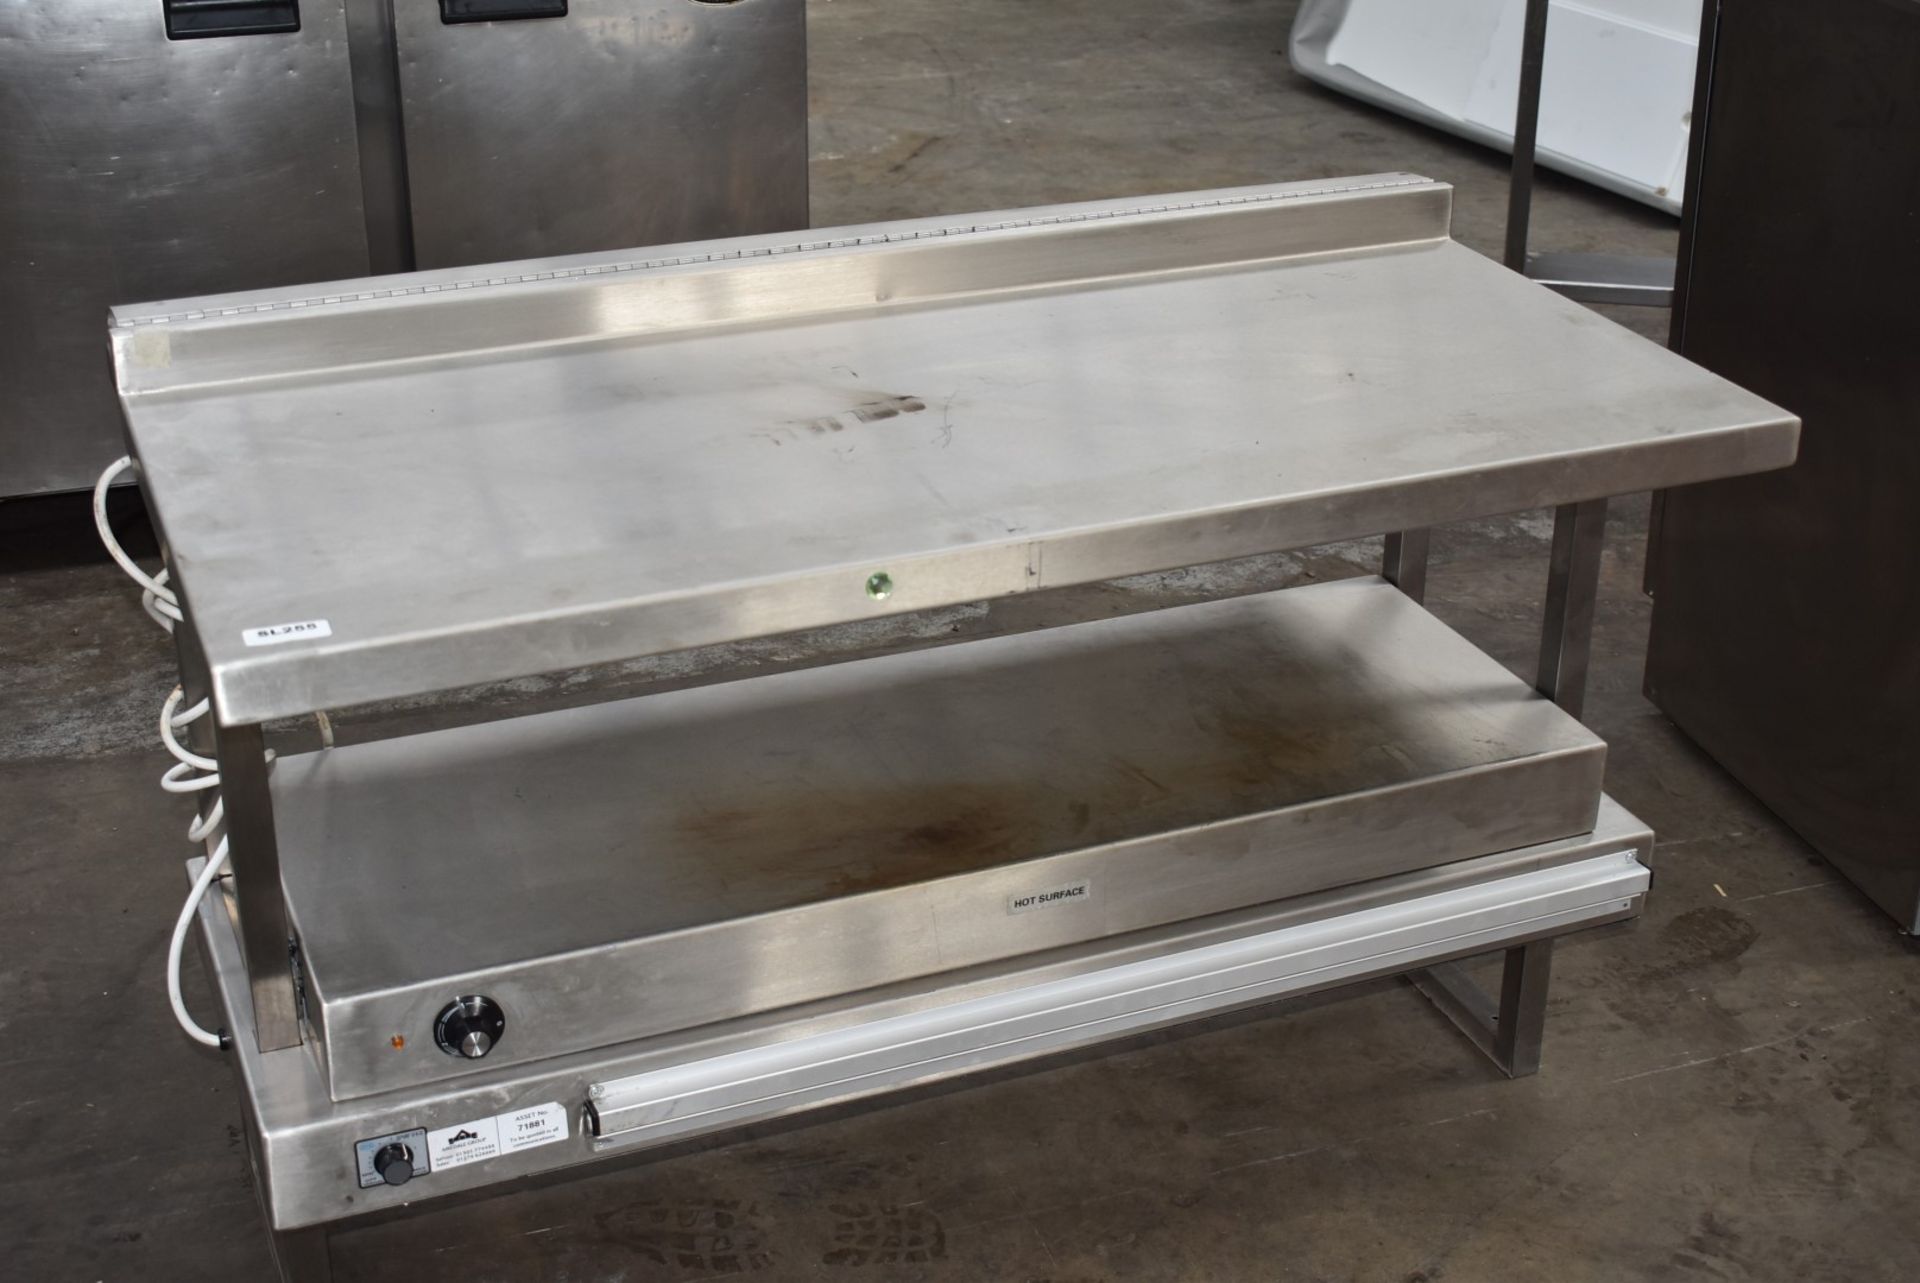 1 x Stainless Steel Bench Mounted Passthrough Food Warmer With Ticket Rails Ref SL255 WH4 - - Image 4 of 6